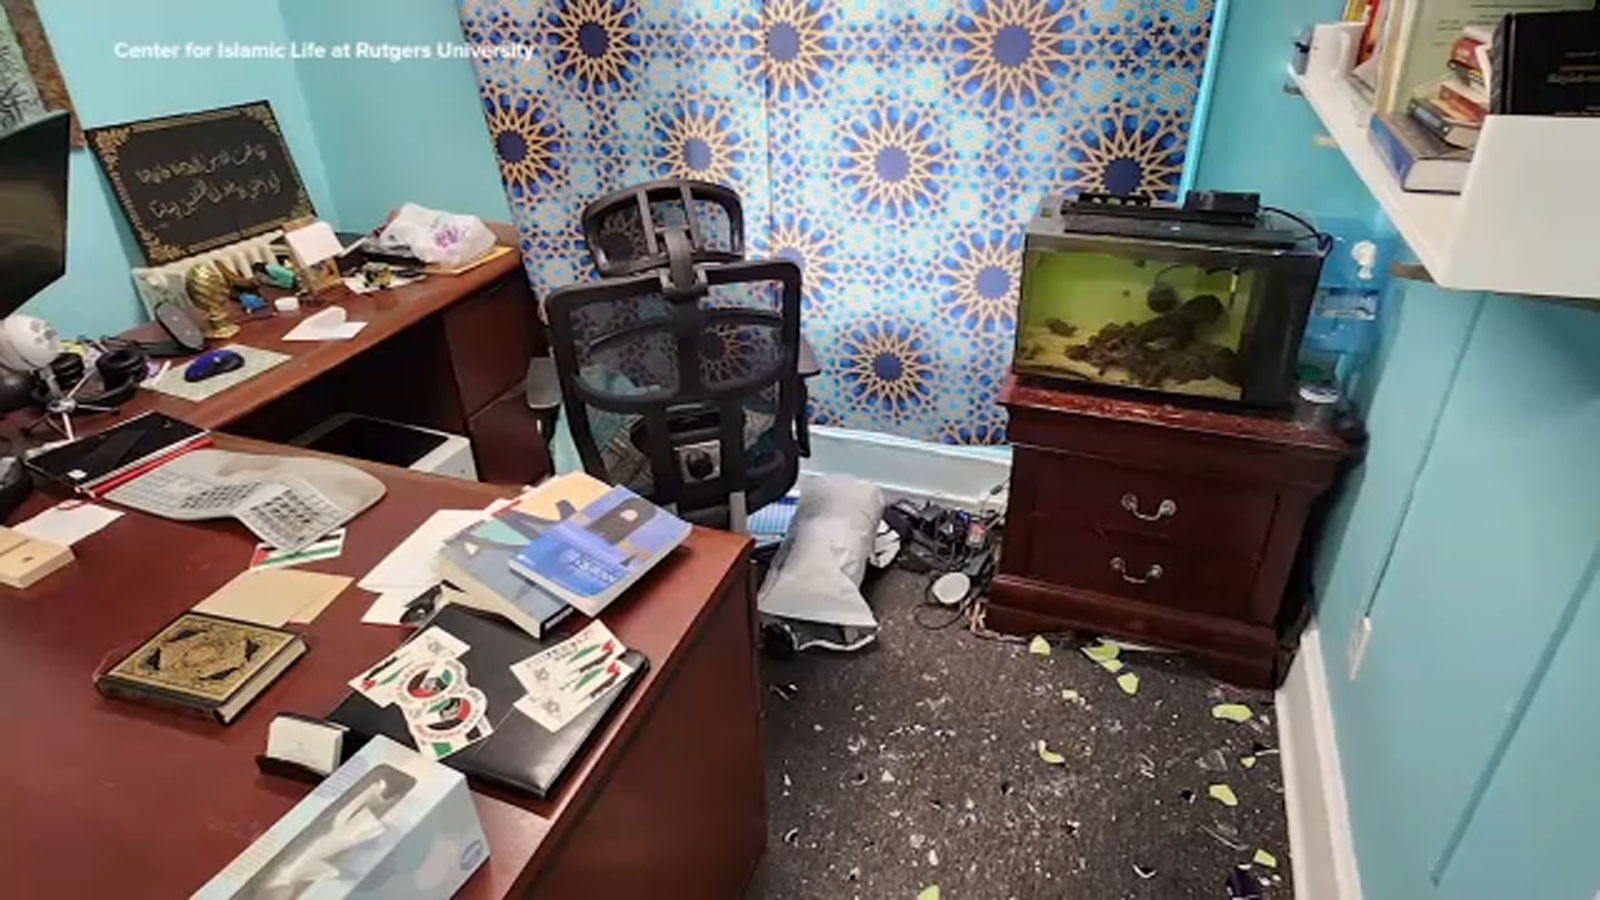 Center for Islamic Life at Rutgers University in NJ vandalized during Muslim holy period of Eid al-Fitr [Video]